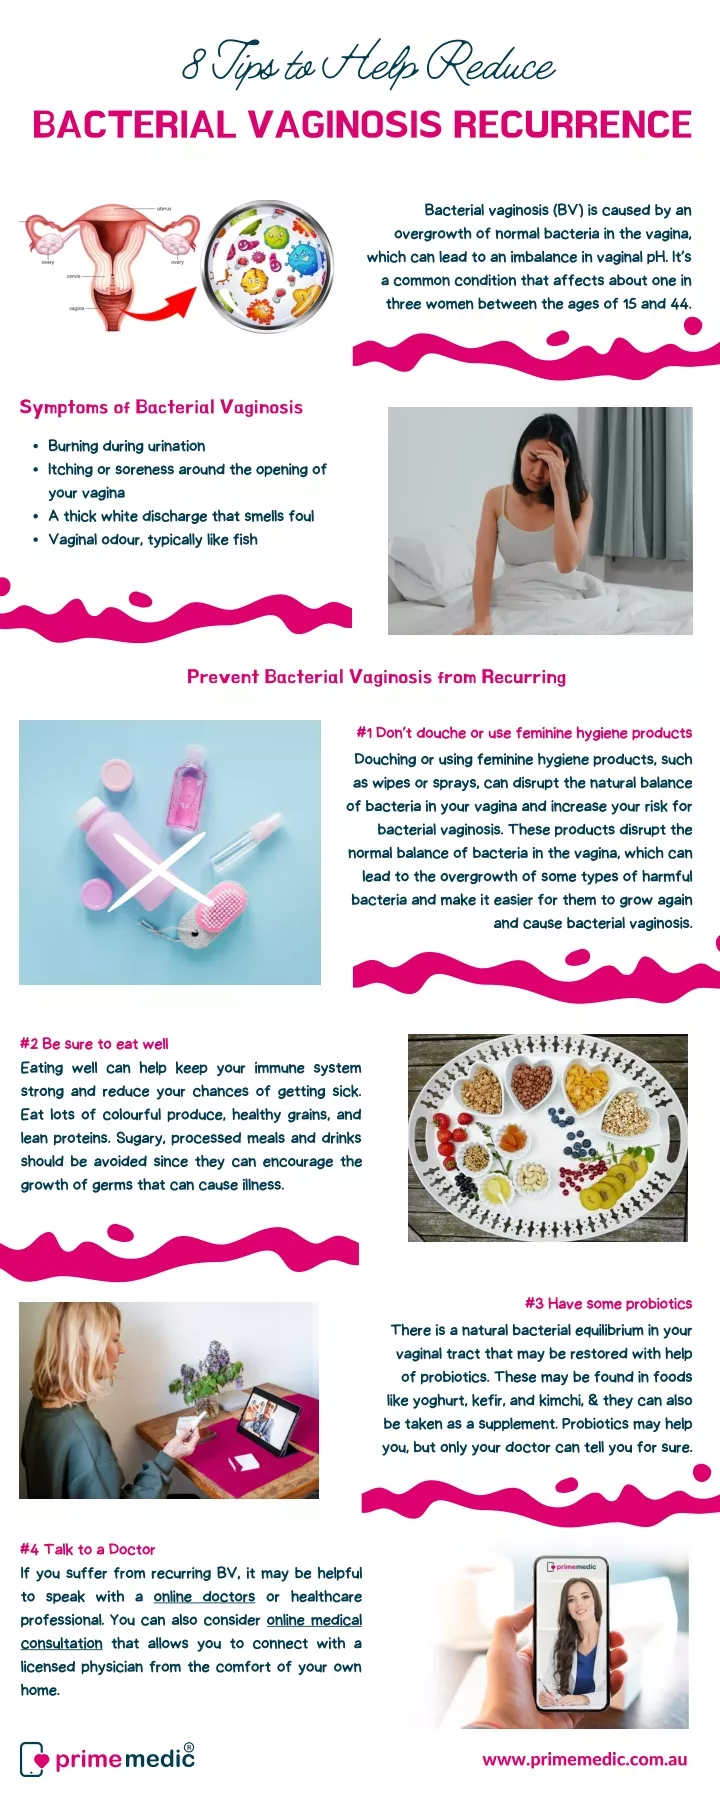 8 tips to help reduce bacterial vaginosis